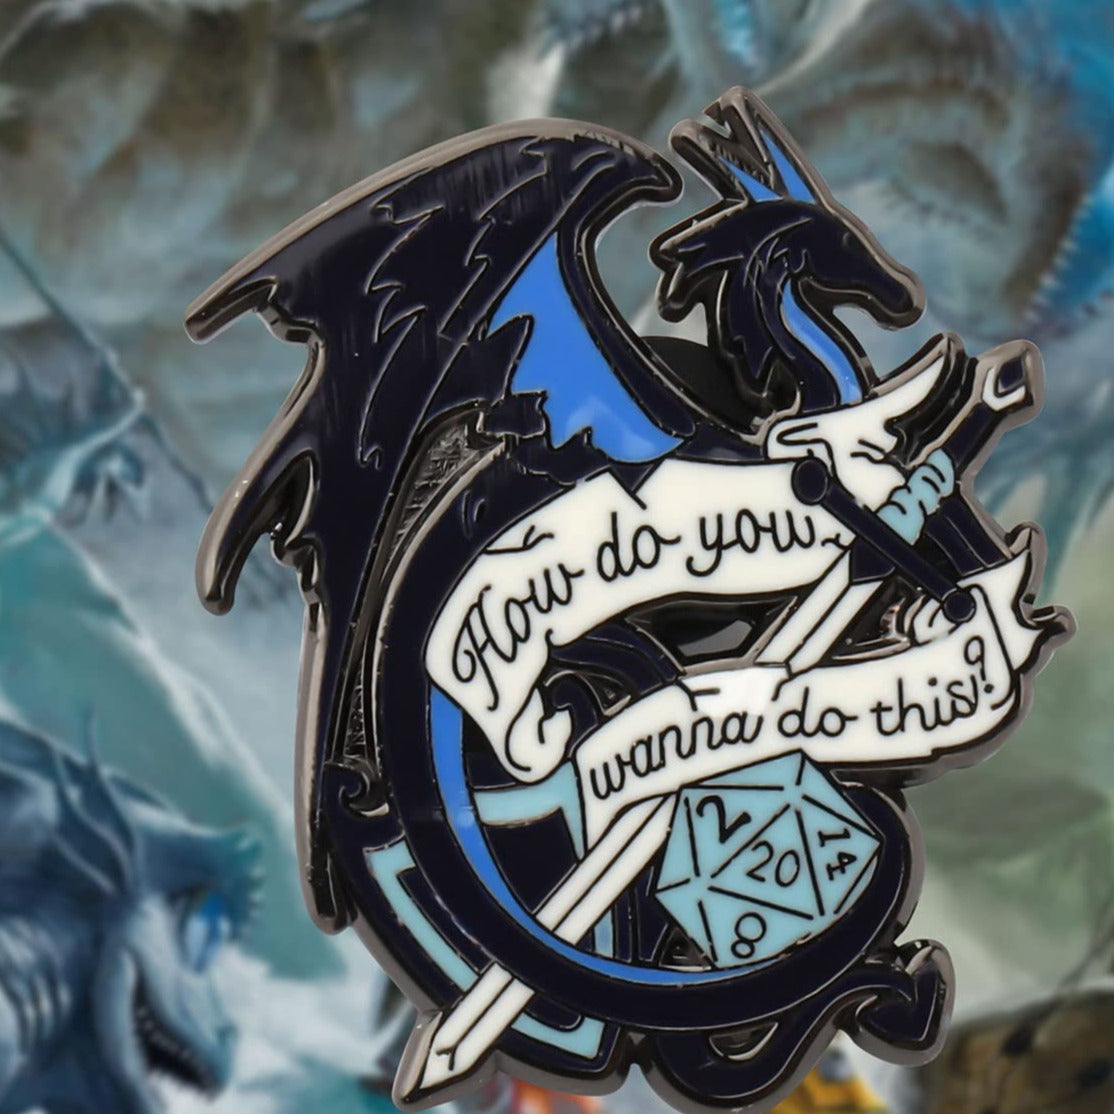 FREE Today: Dungeons & Dragons ‘How Do You Wanna Do This?’ Enamel Pin